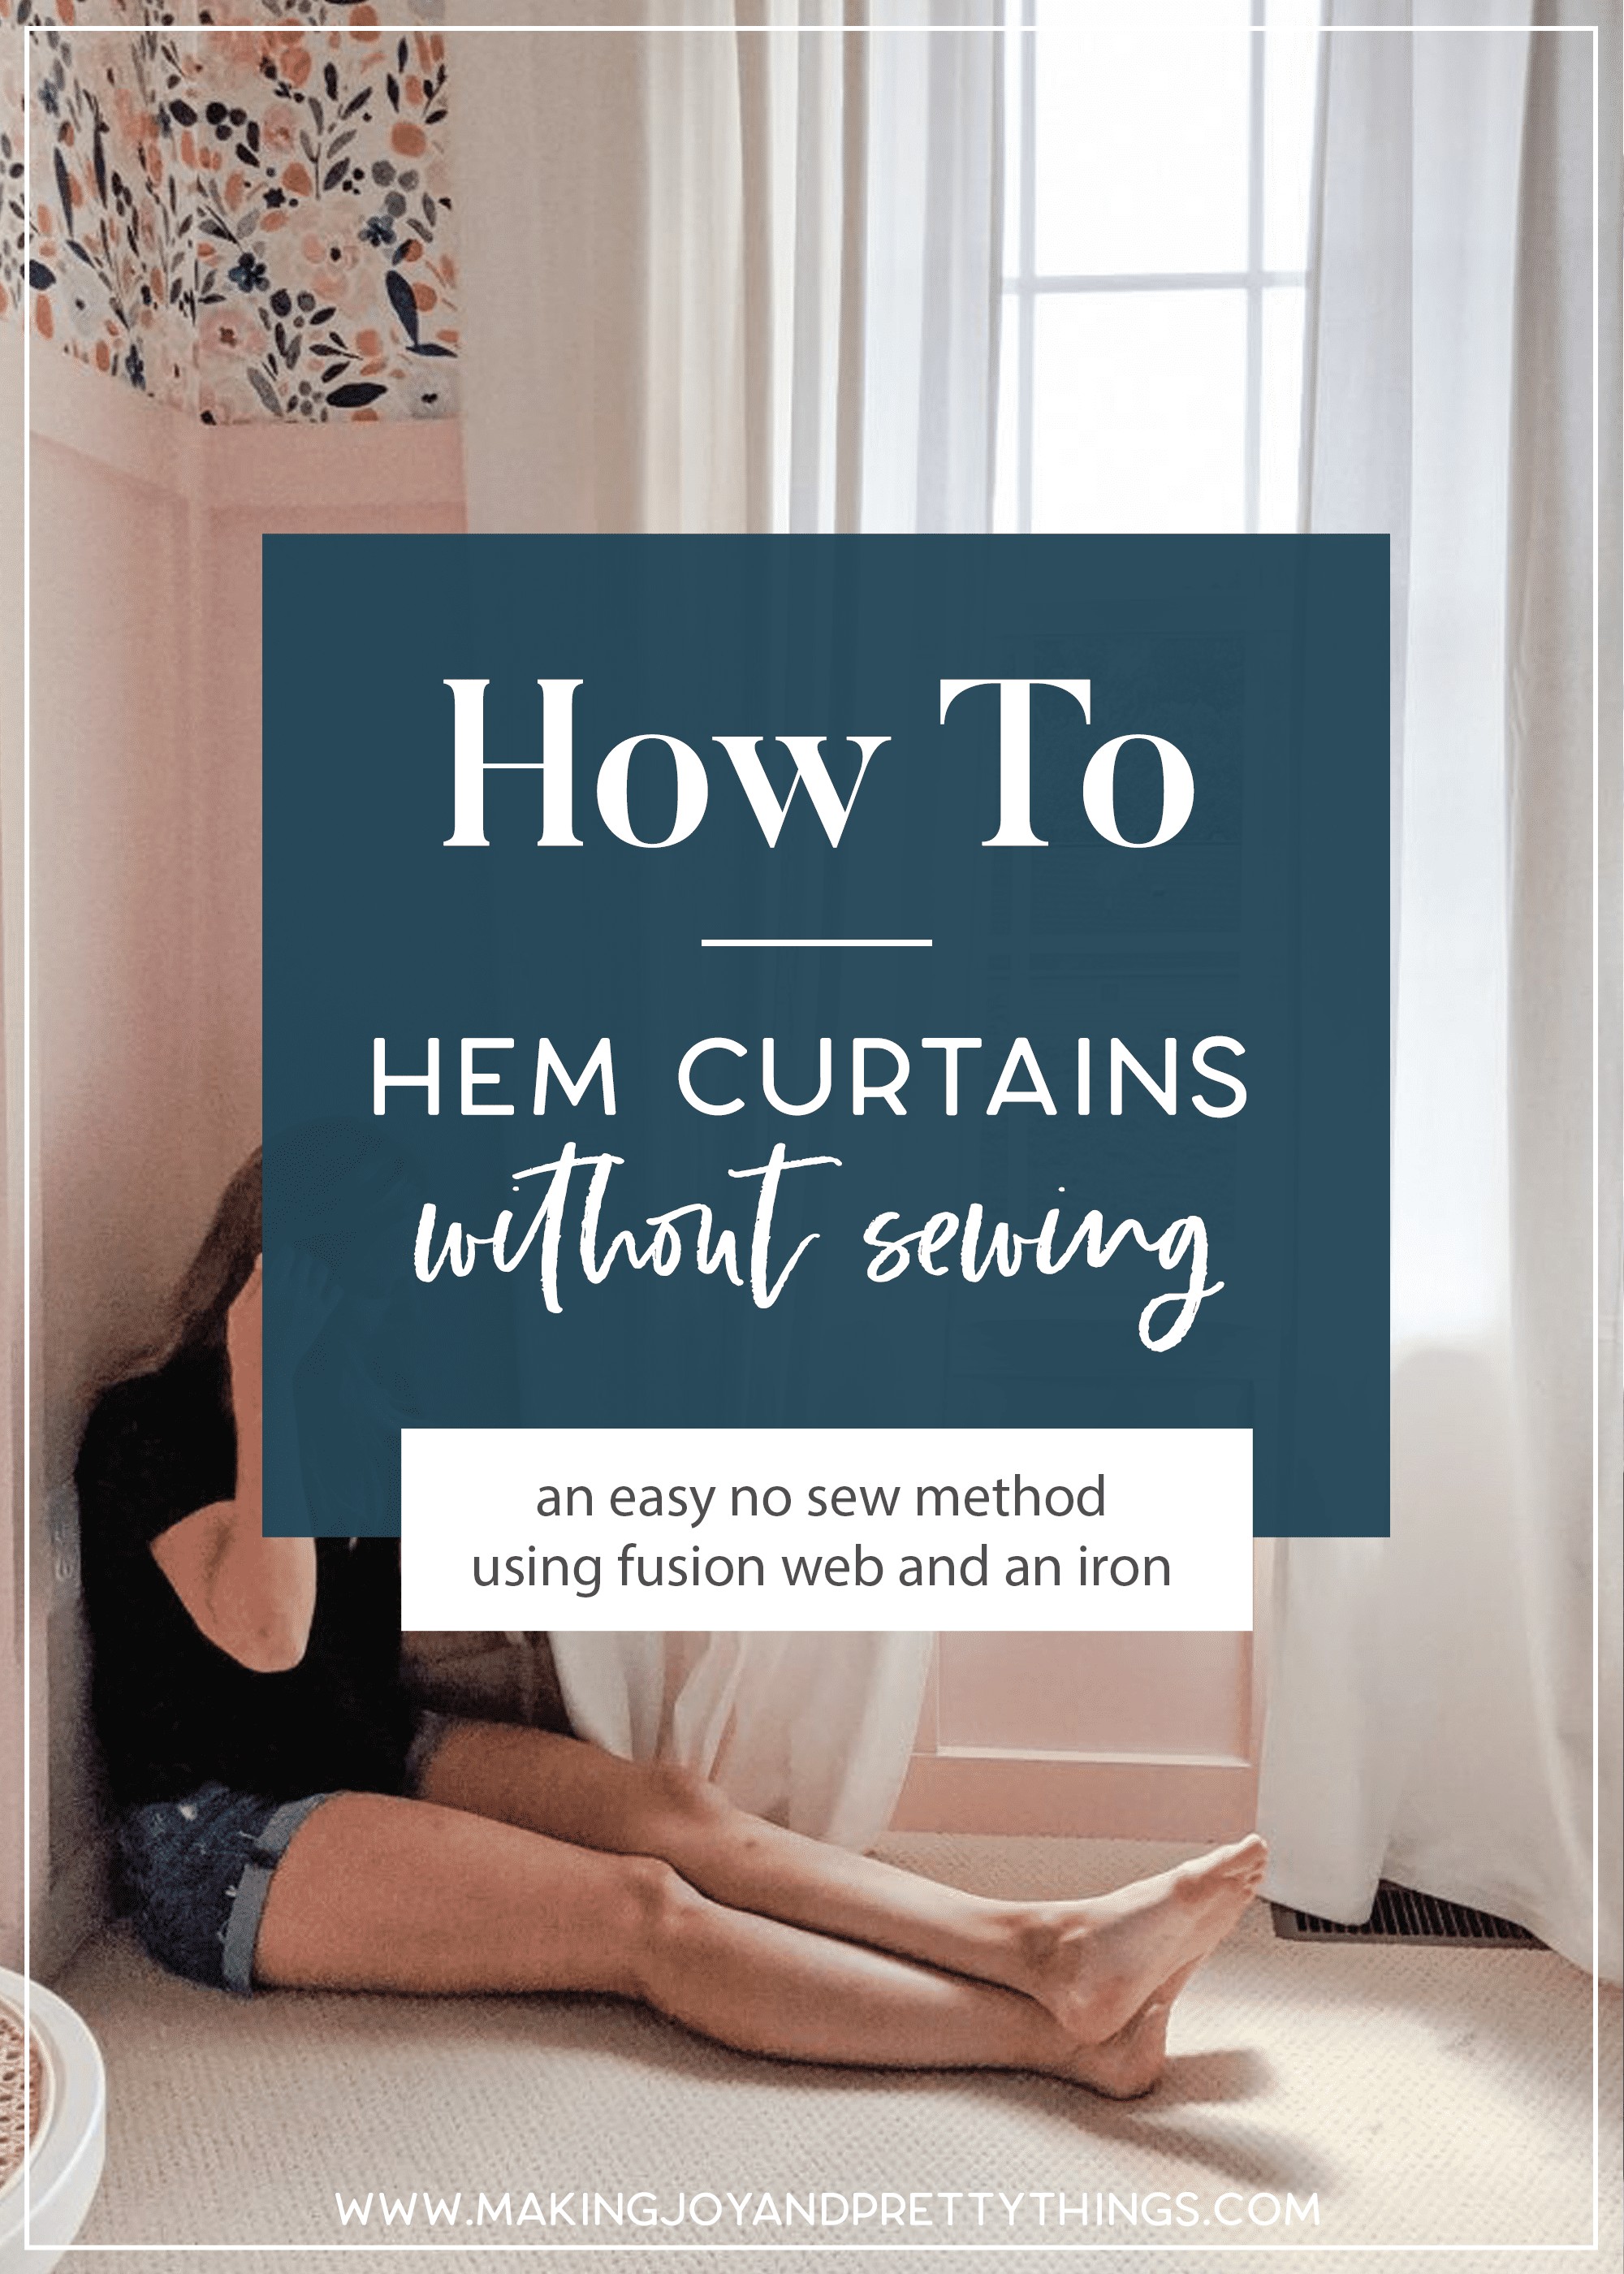 A woman wearing jean shorts and a black t-shirt sits on the floor next to a window with floor-length white curtains. A navy blue box with text is imposed over the image, it reads "how to hem curtains without sewing: an easy no-sew method using fusion web and an iron"